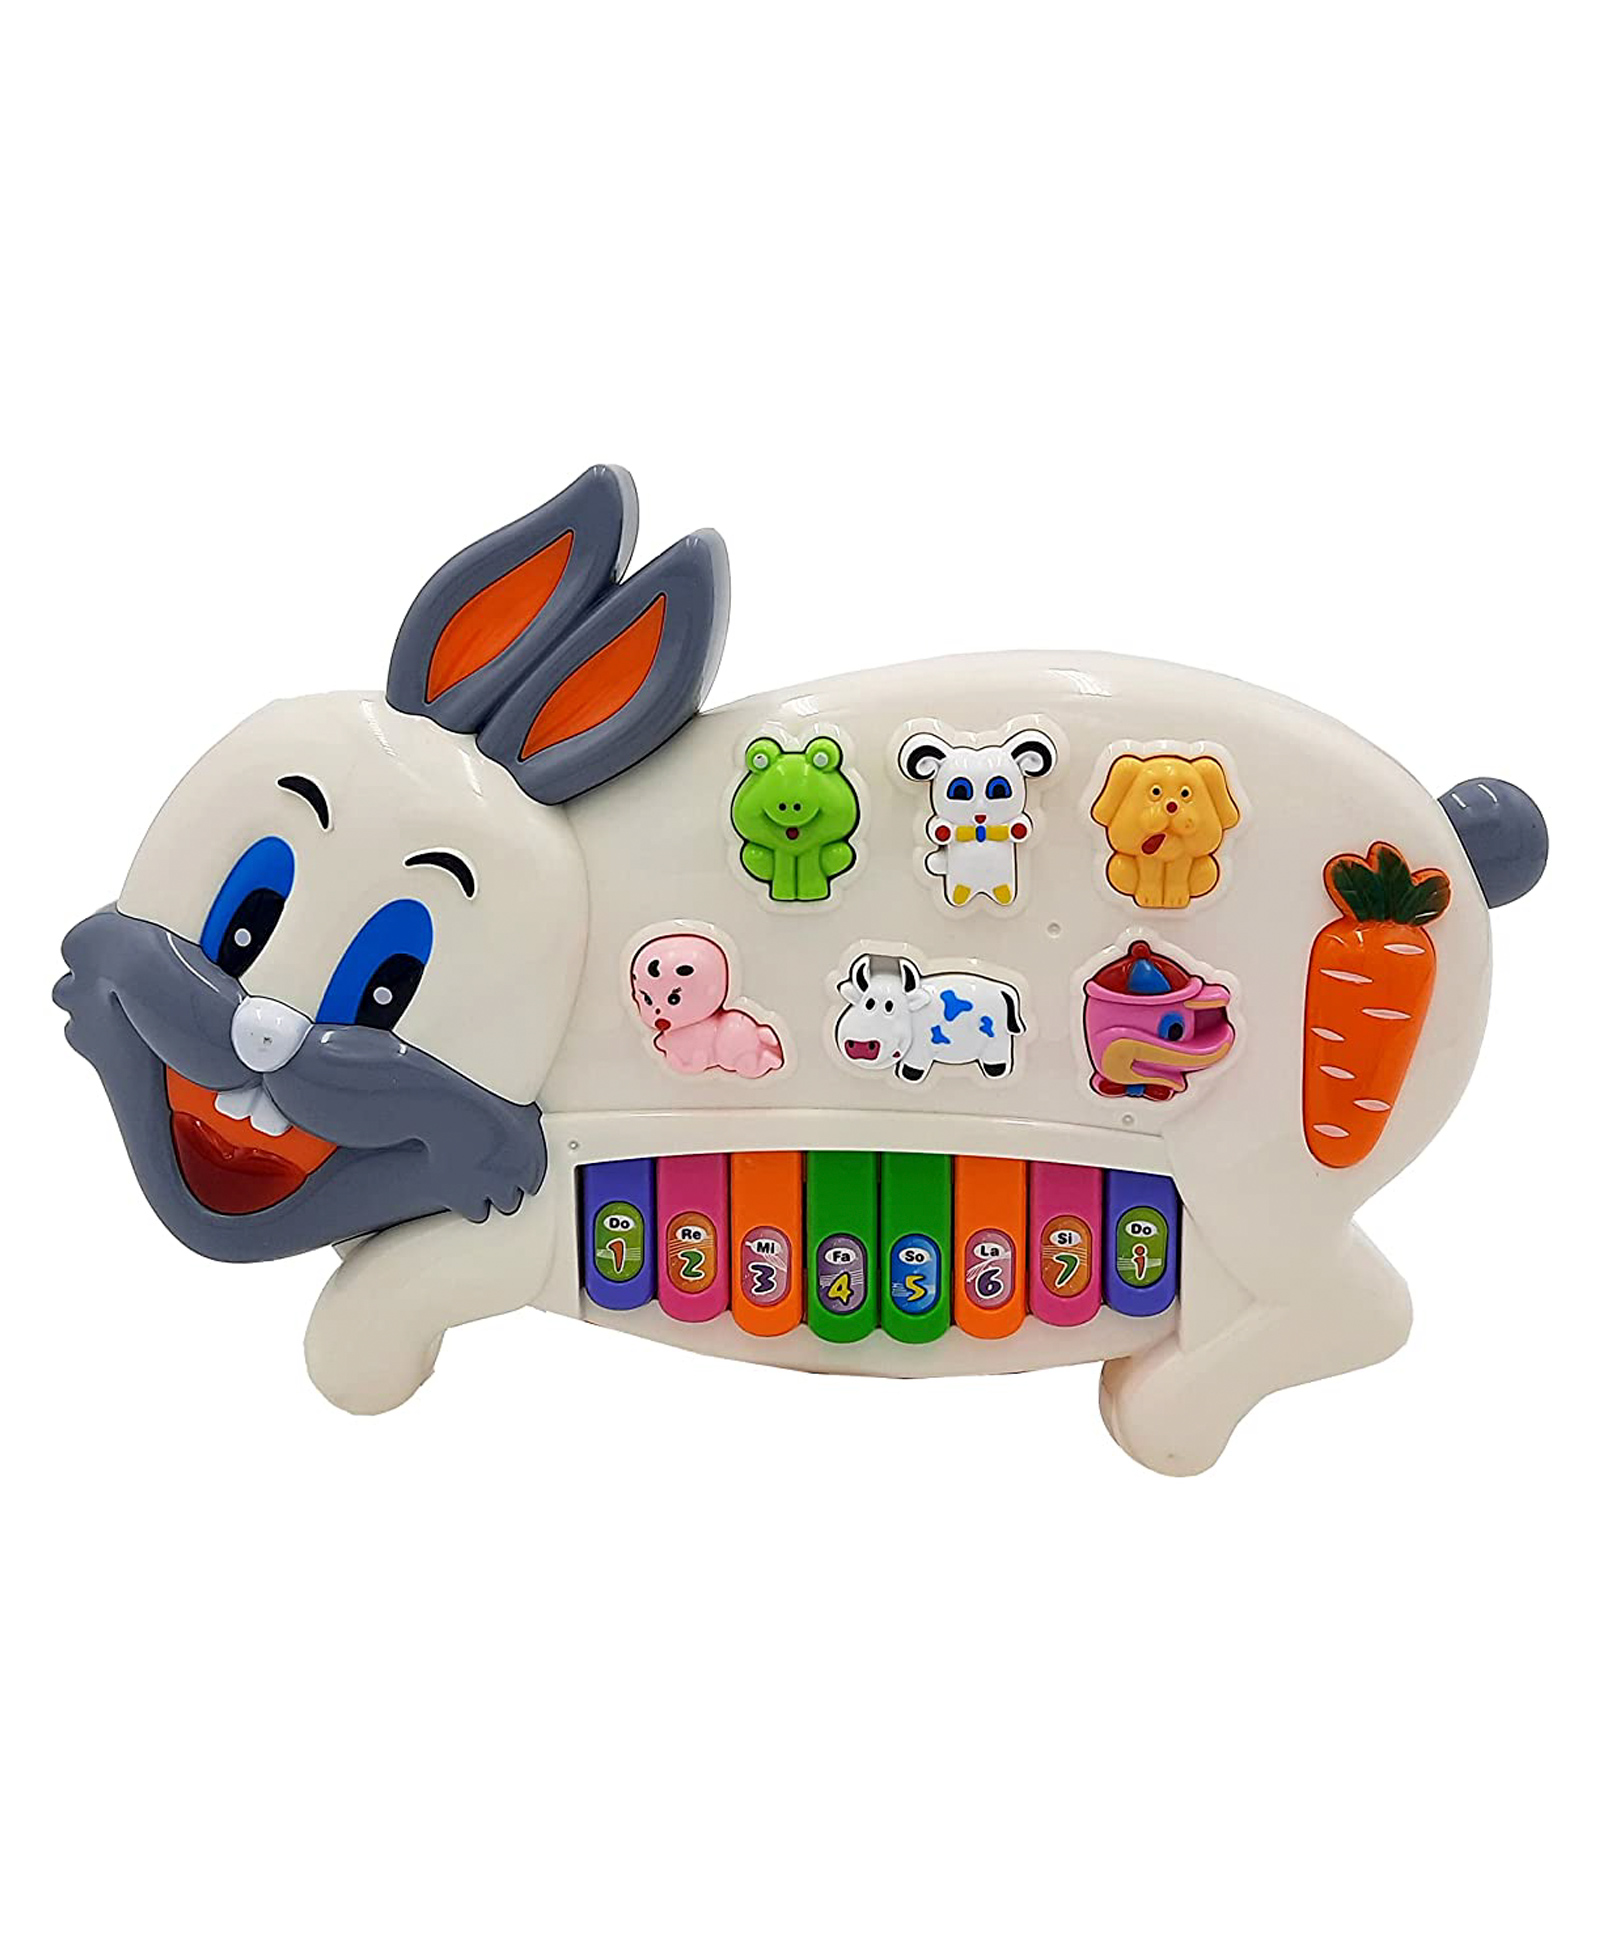 SVE Musical Light & Sound Rabbit Piano Toy Beautiful Rabbit Design with 3  Modes of Animals Sound Flashing Light Effects Great Music and Sound -  Multicolor Online India, Buy Musical Toys for (